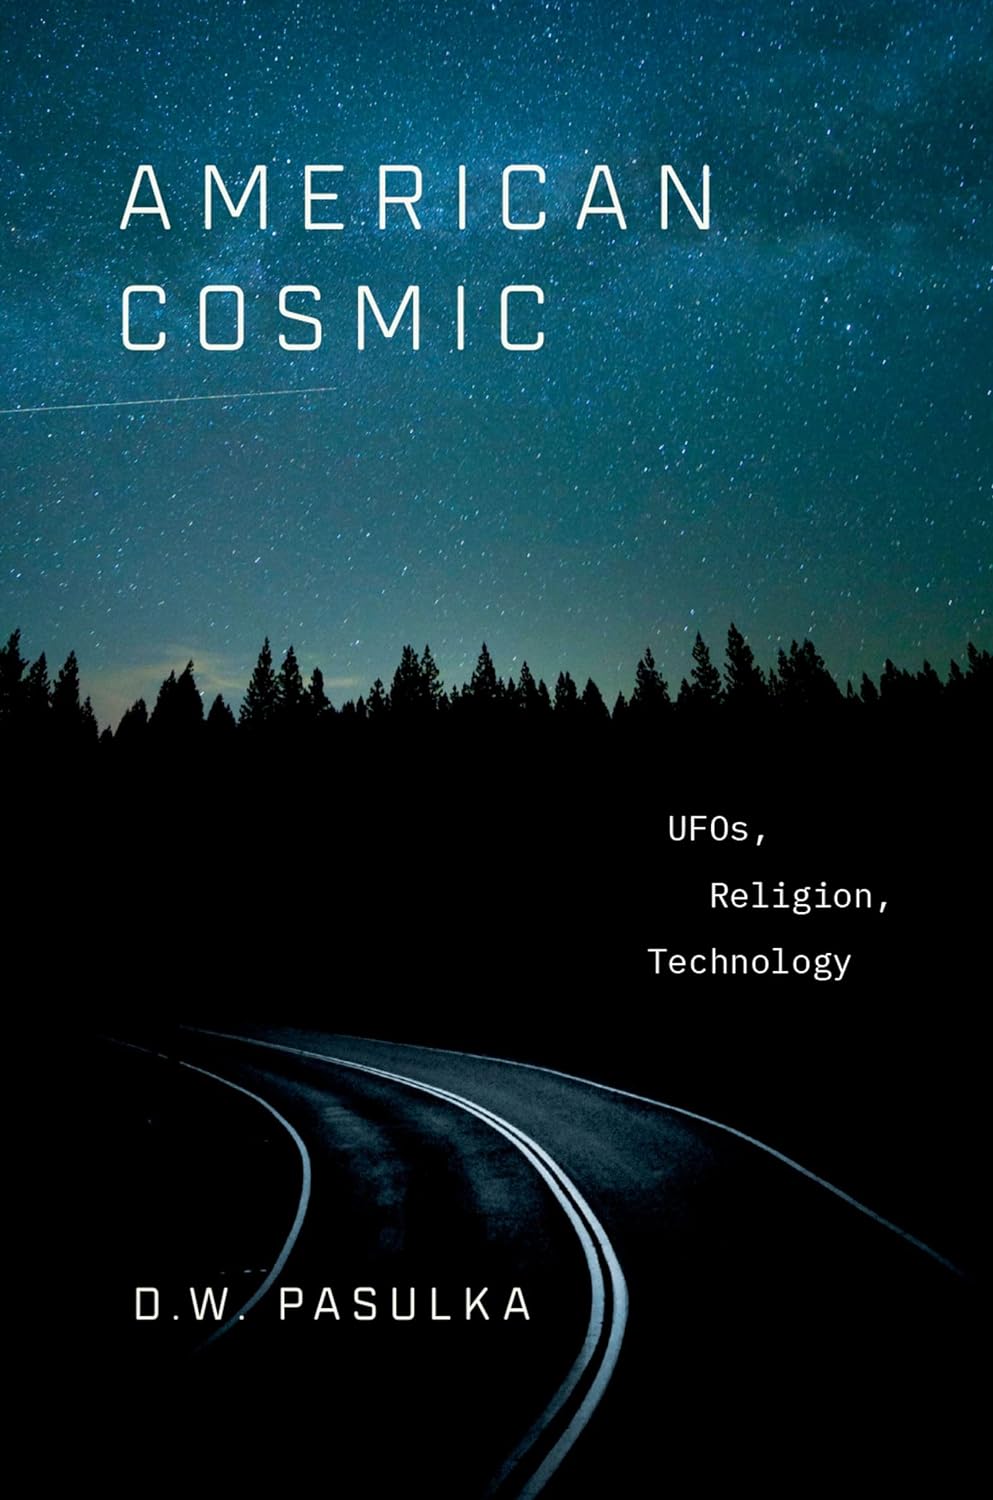 "American Cosmic: UFOs, Religion, Technology" by D.W. Pasulka